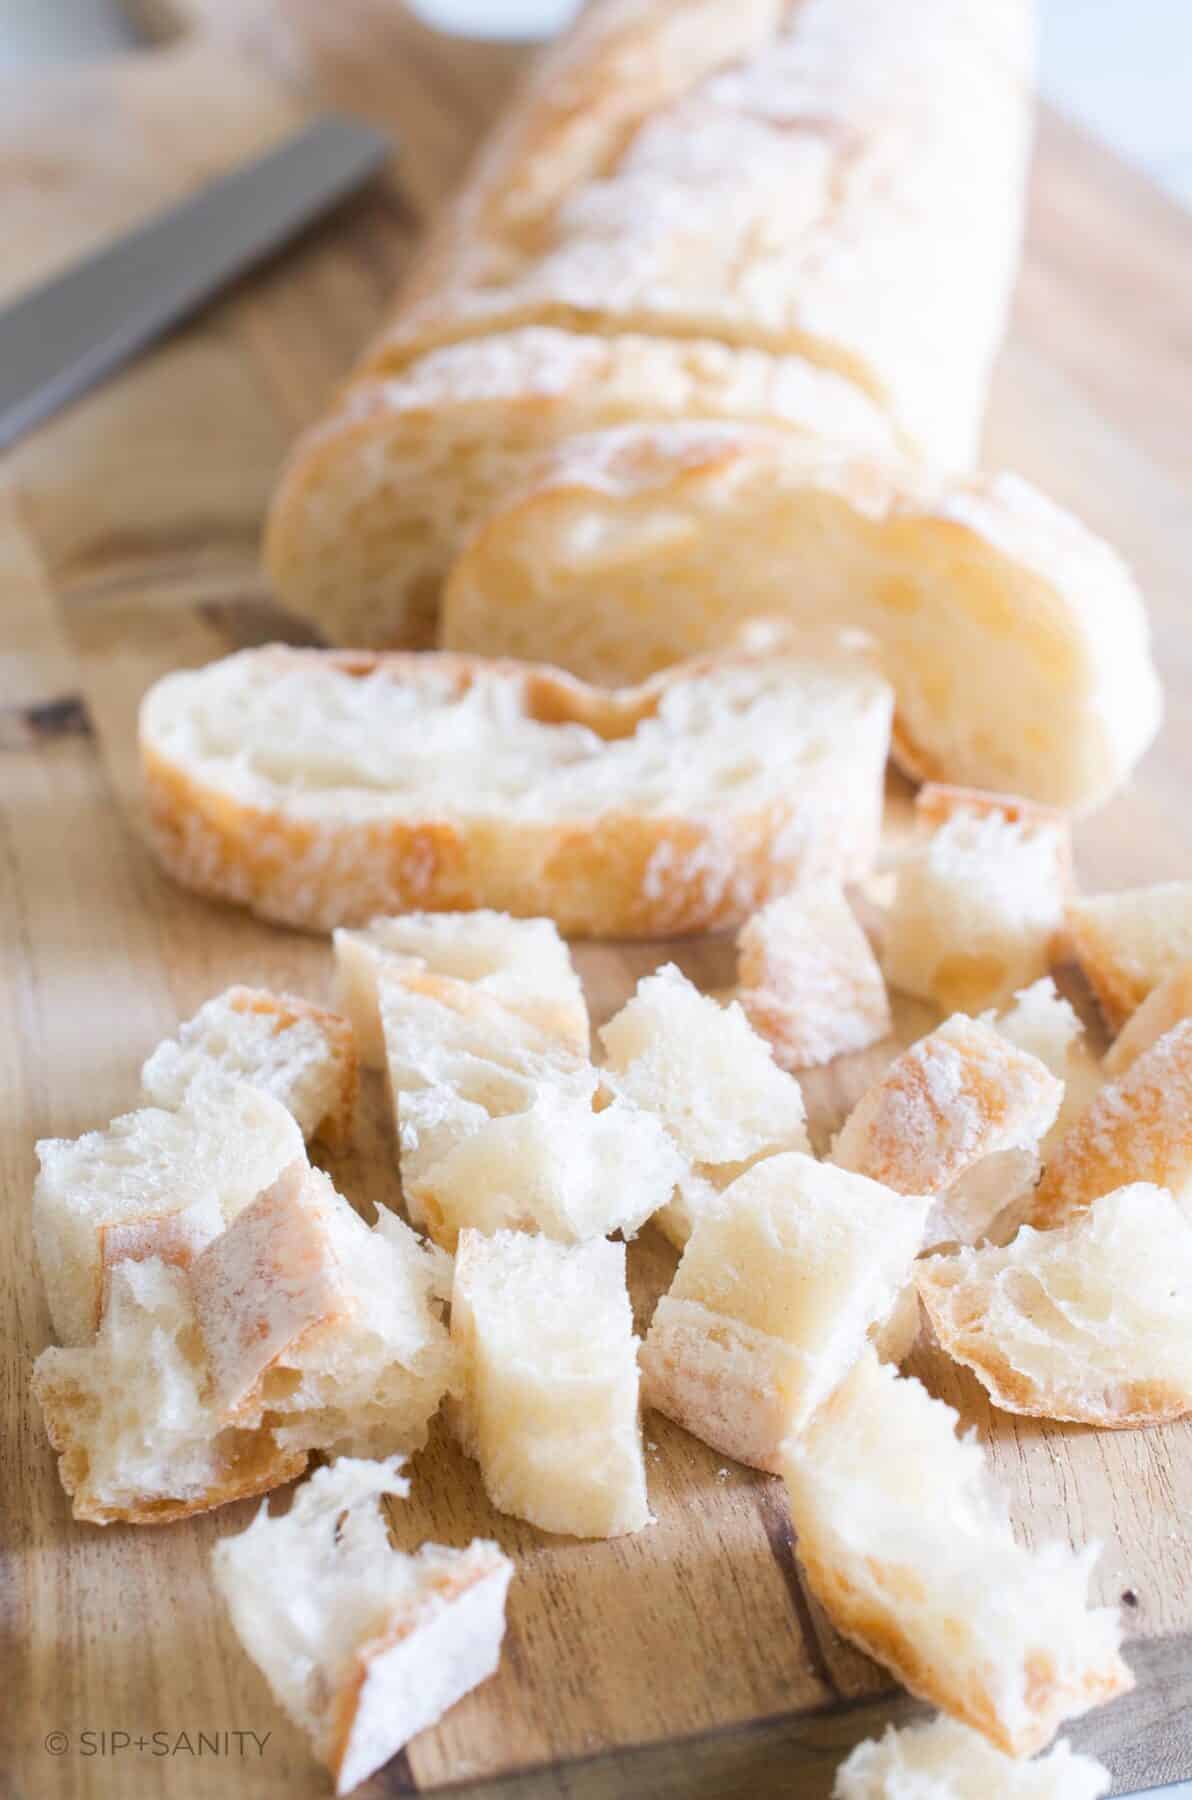 A baguette on a cutting board with slices and cubes of bread.